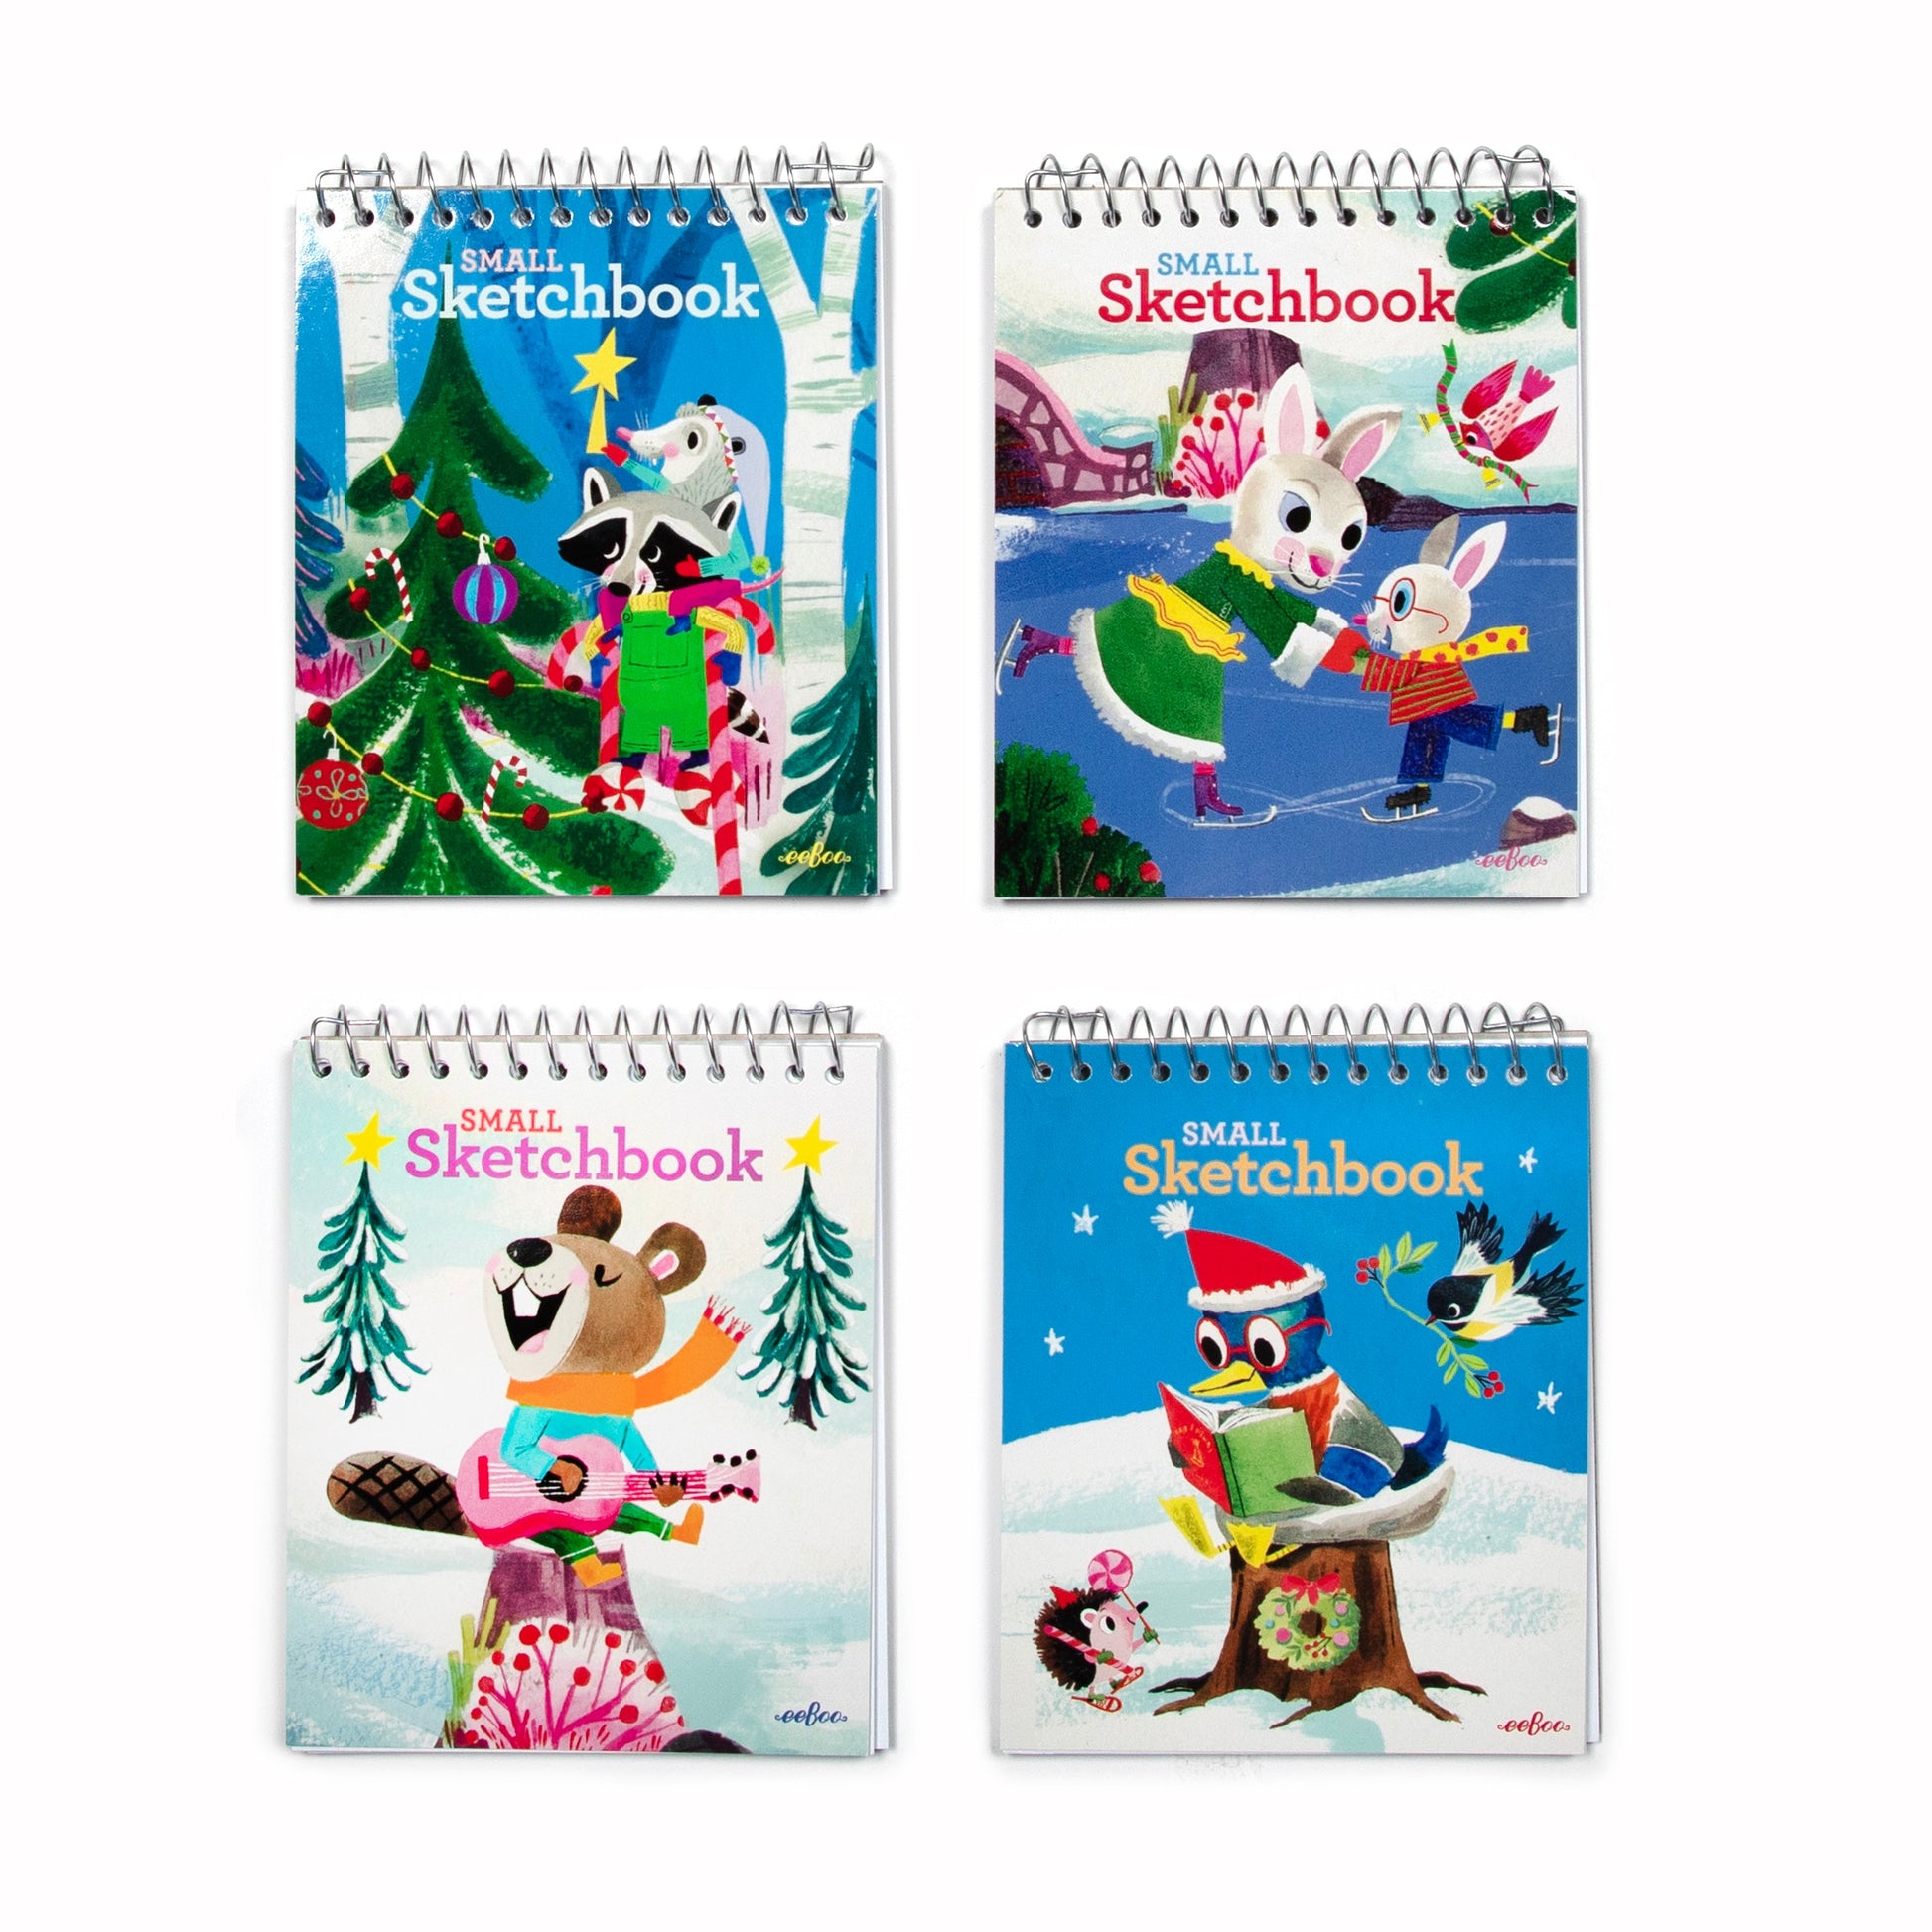 Small Sketchbooks Winter Assortment (24 units) Unique Birthday Party Favors